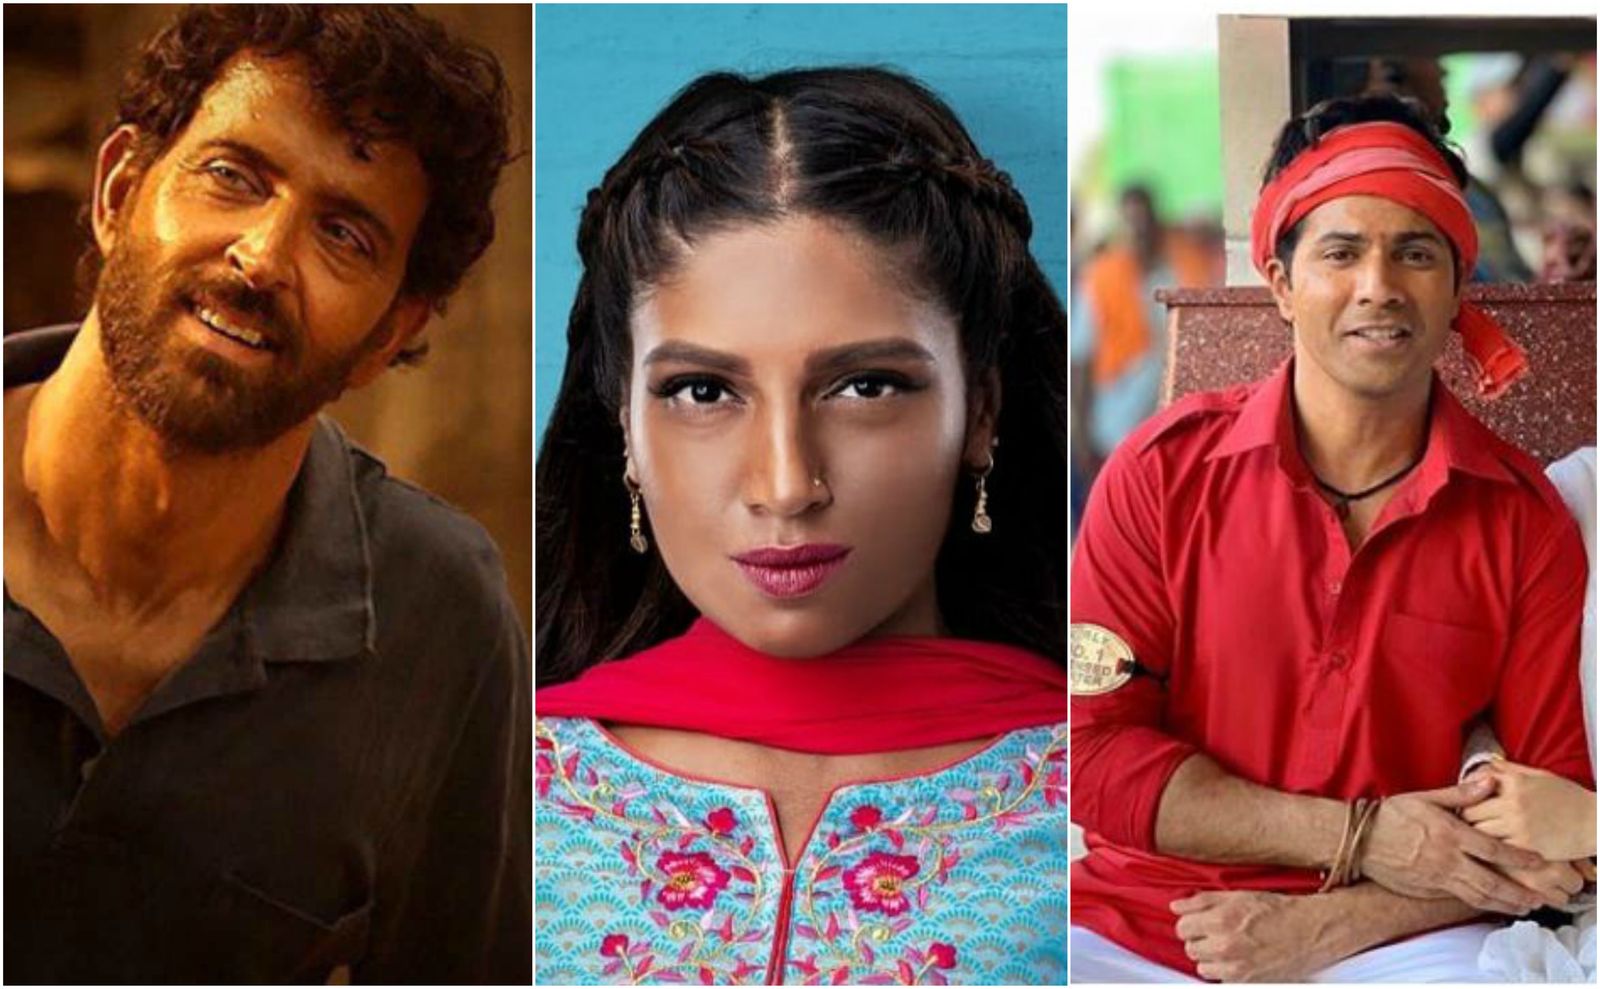 From Hrithik Roshan In Super 30 To Bhumi Pednekar In Bala, Brown-Face Is A Disturbing And Racist Practice In Bollywood That Needs To Stop